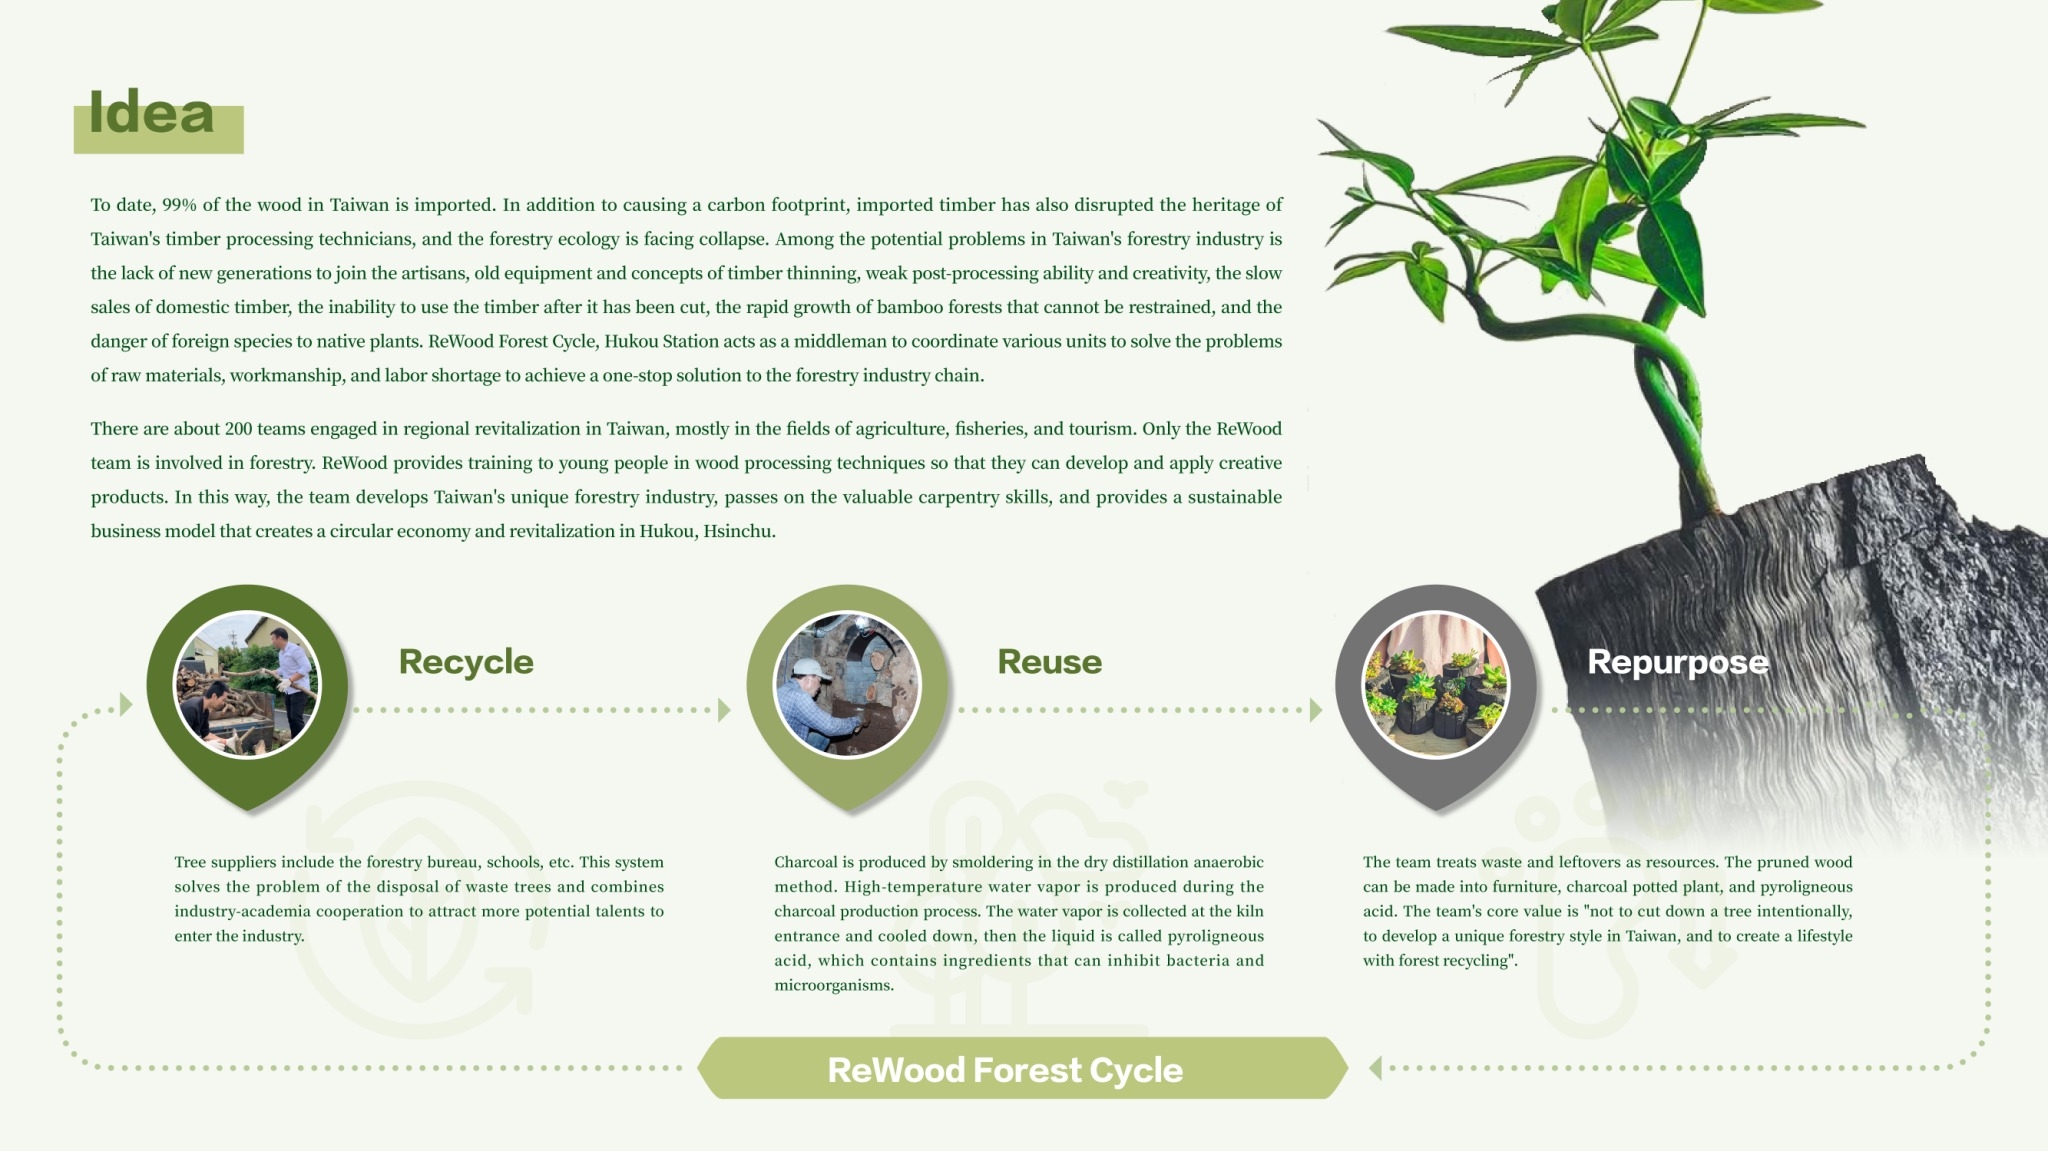 ReWood Forest Cycle